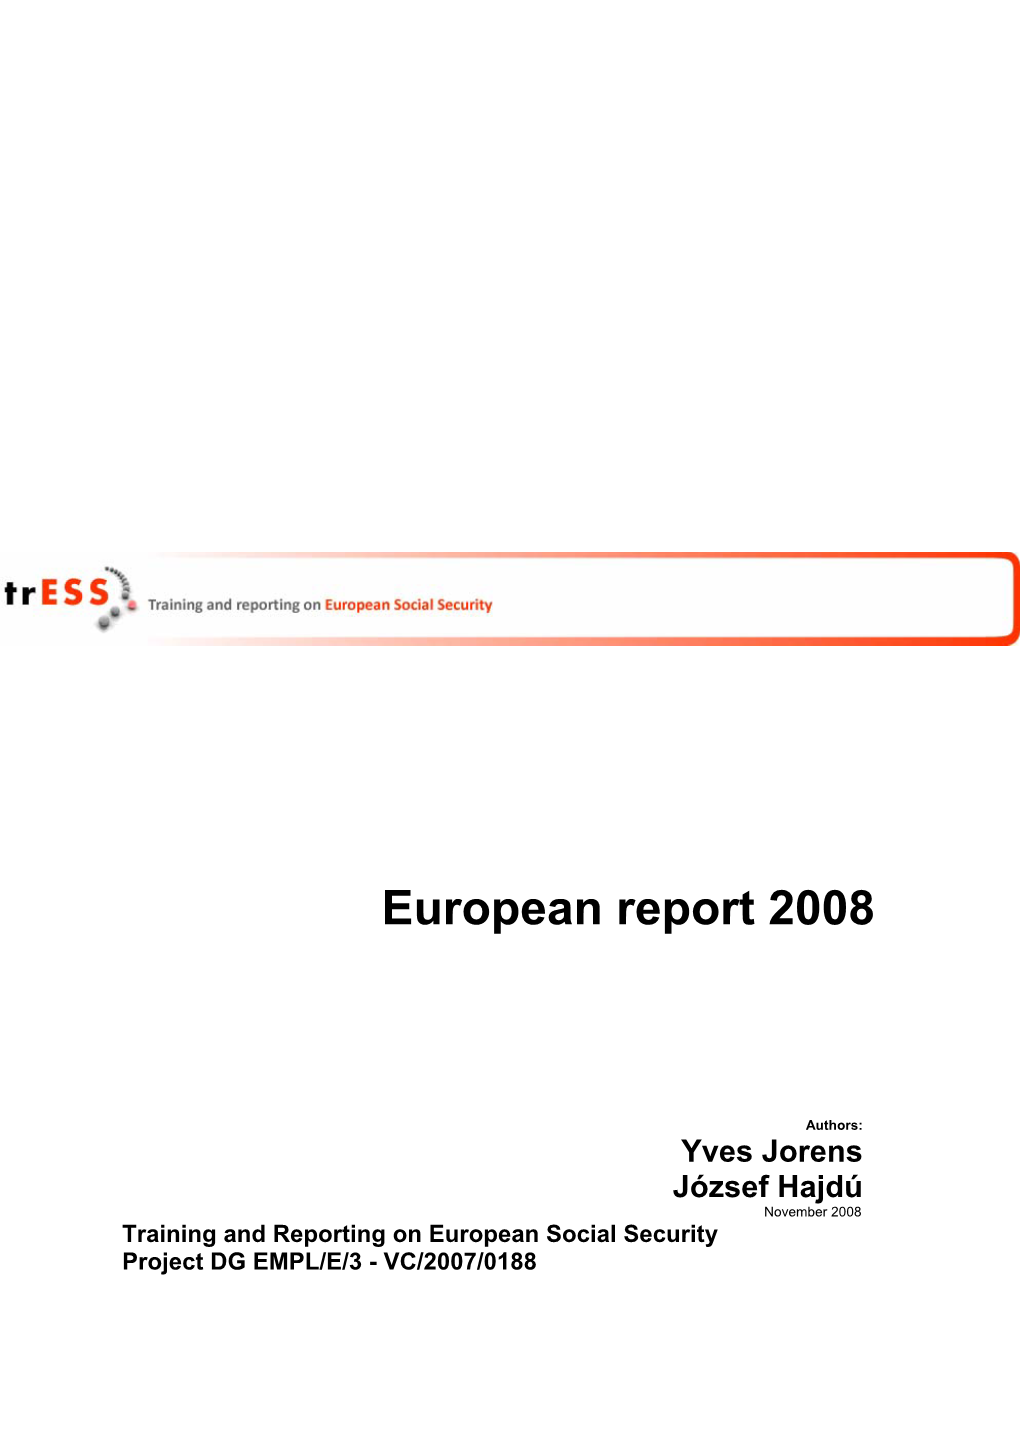 Training and Reporting on European Social Security